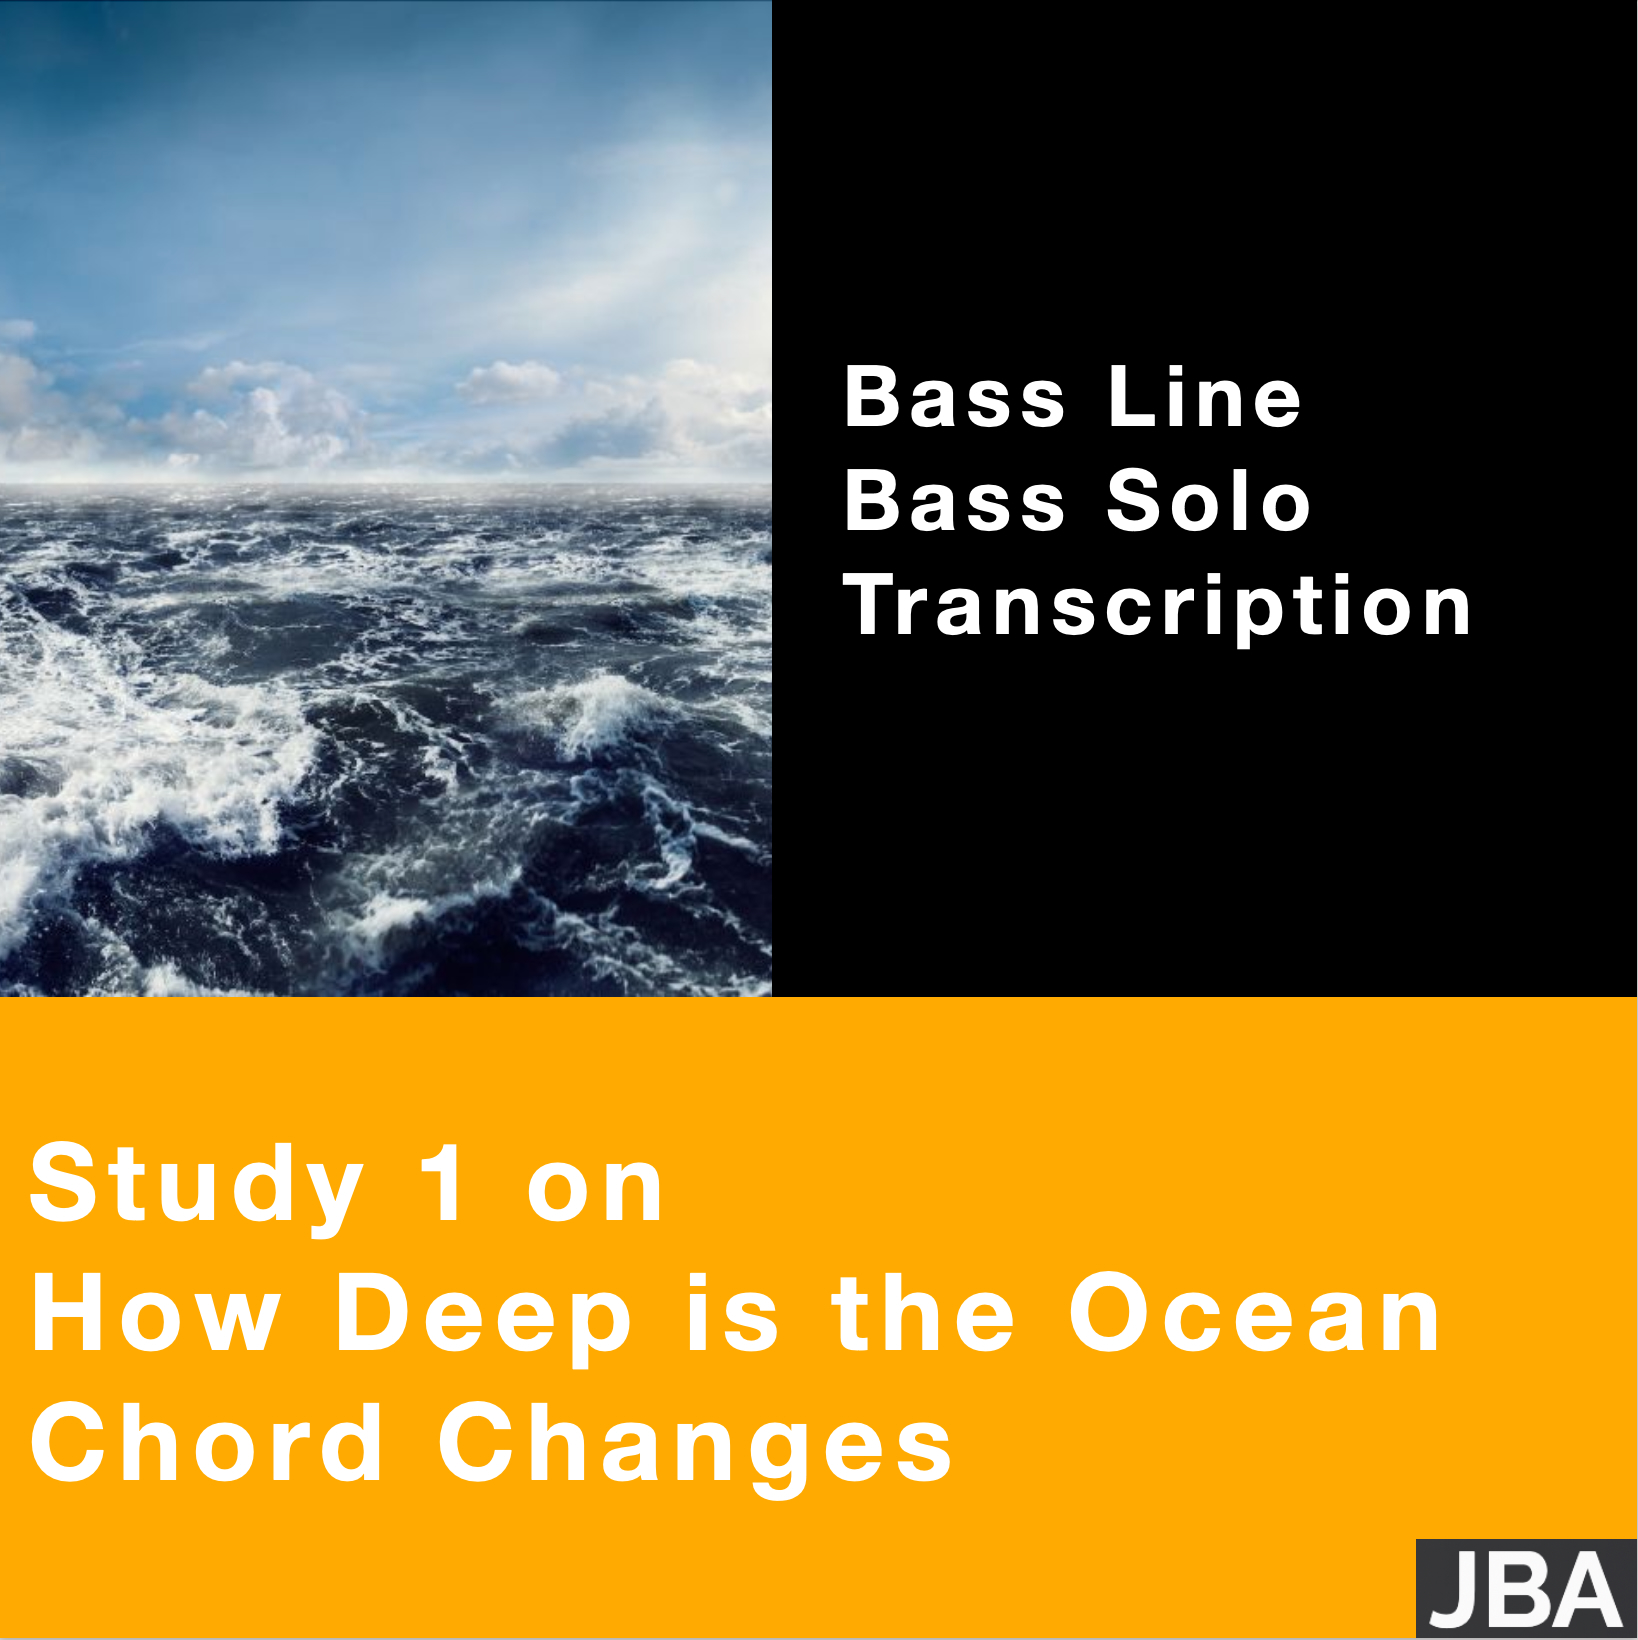 Study  1 on How Deep is the Ocean chord changes